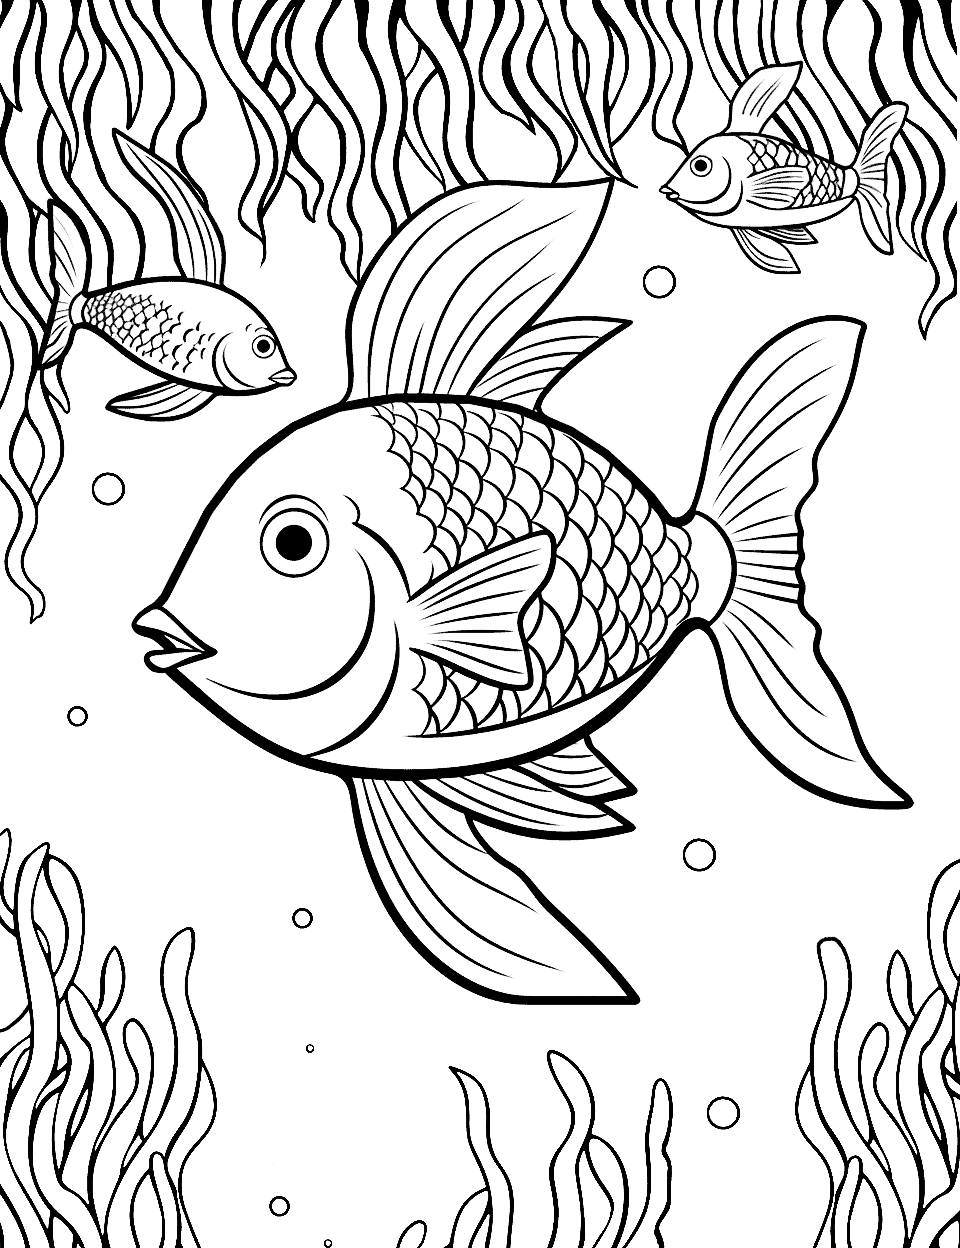 Fish coloring pages free printable sheets